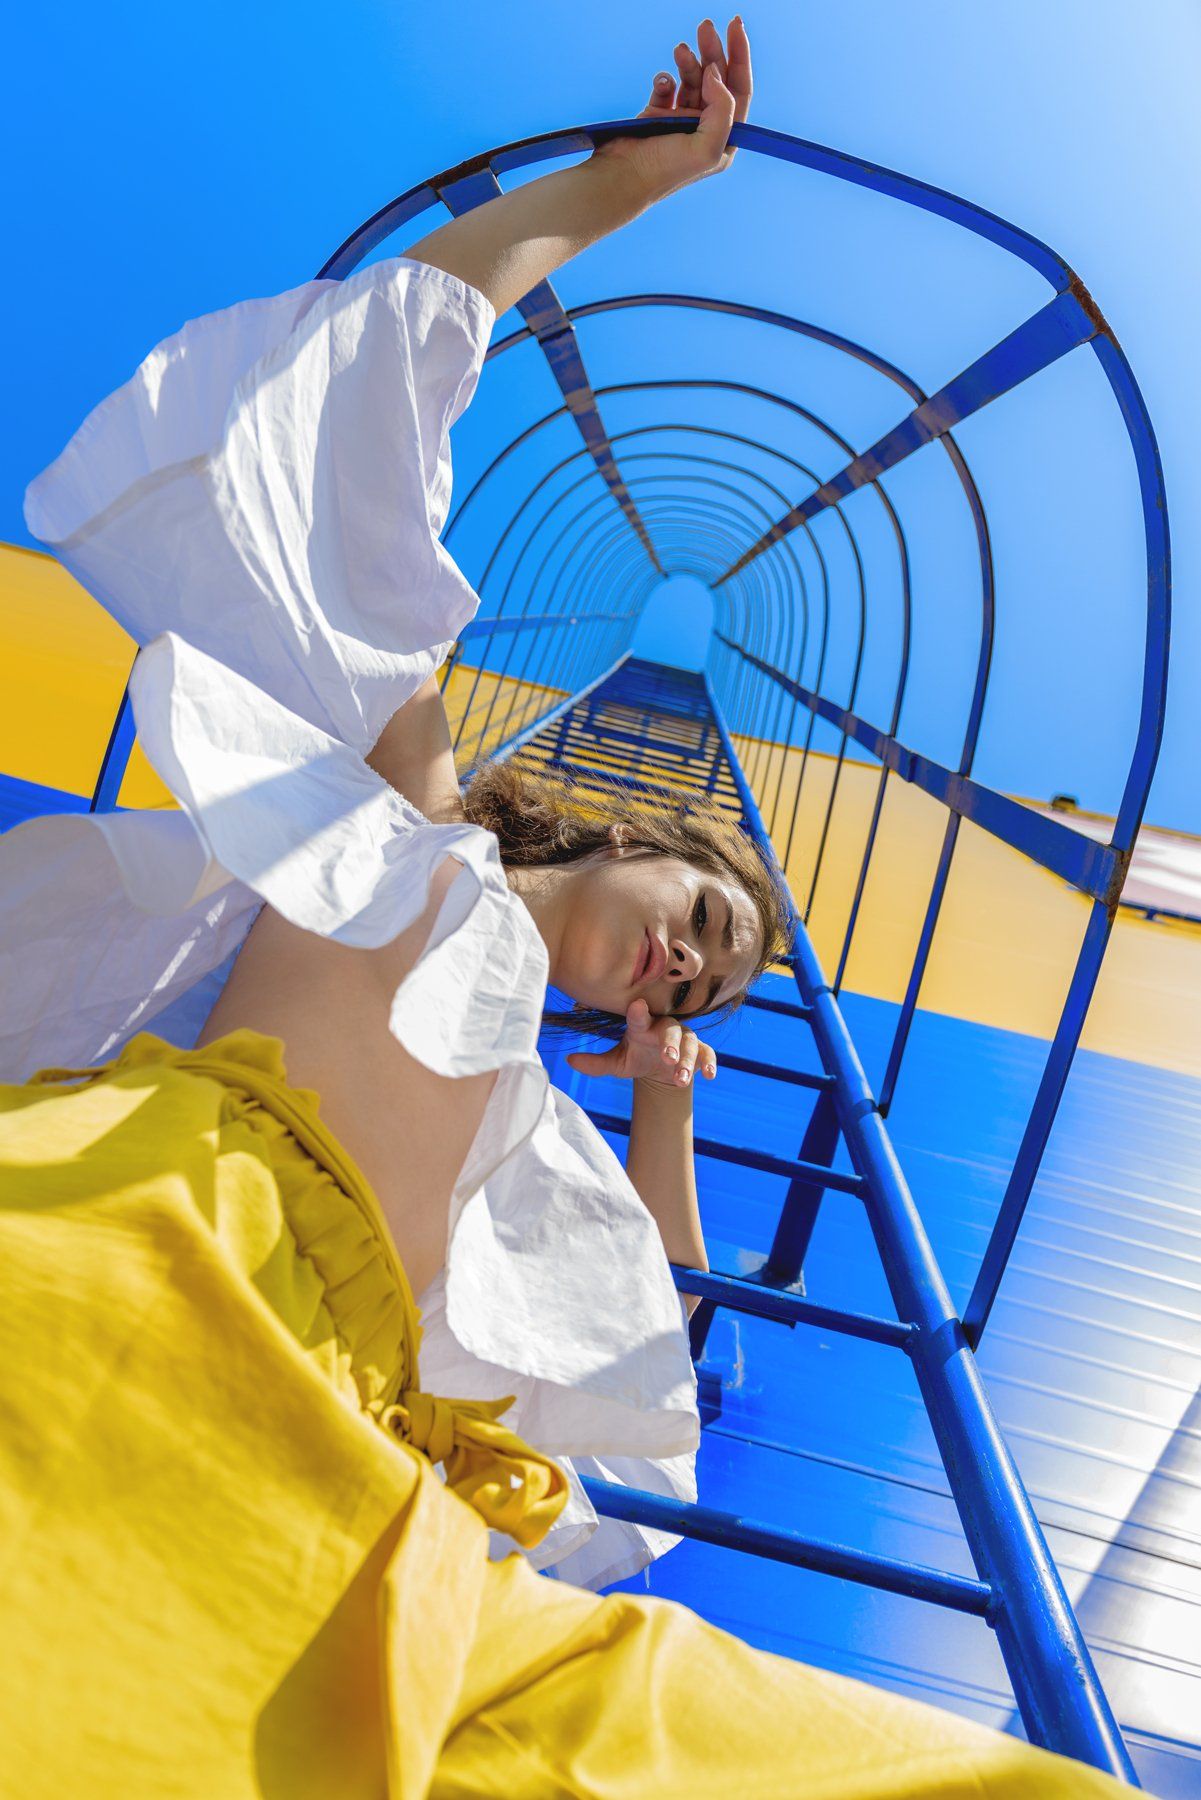 yellow, blue, girl, model, nikon, contrast, sky, staircase, fashion, russia, Анна Дегтярёва